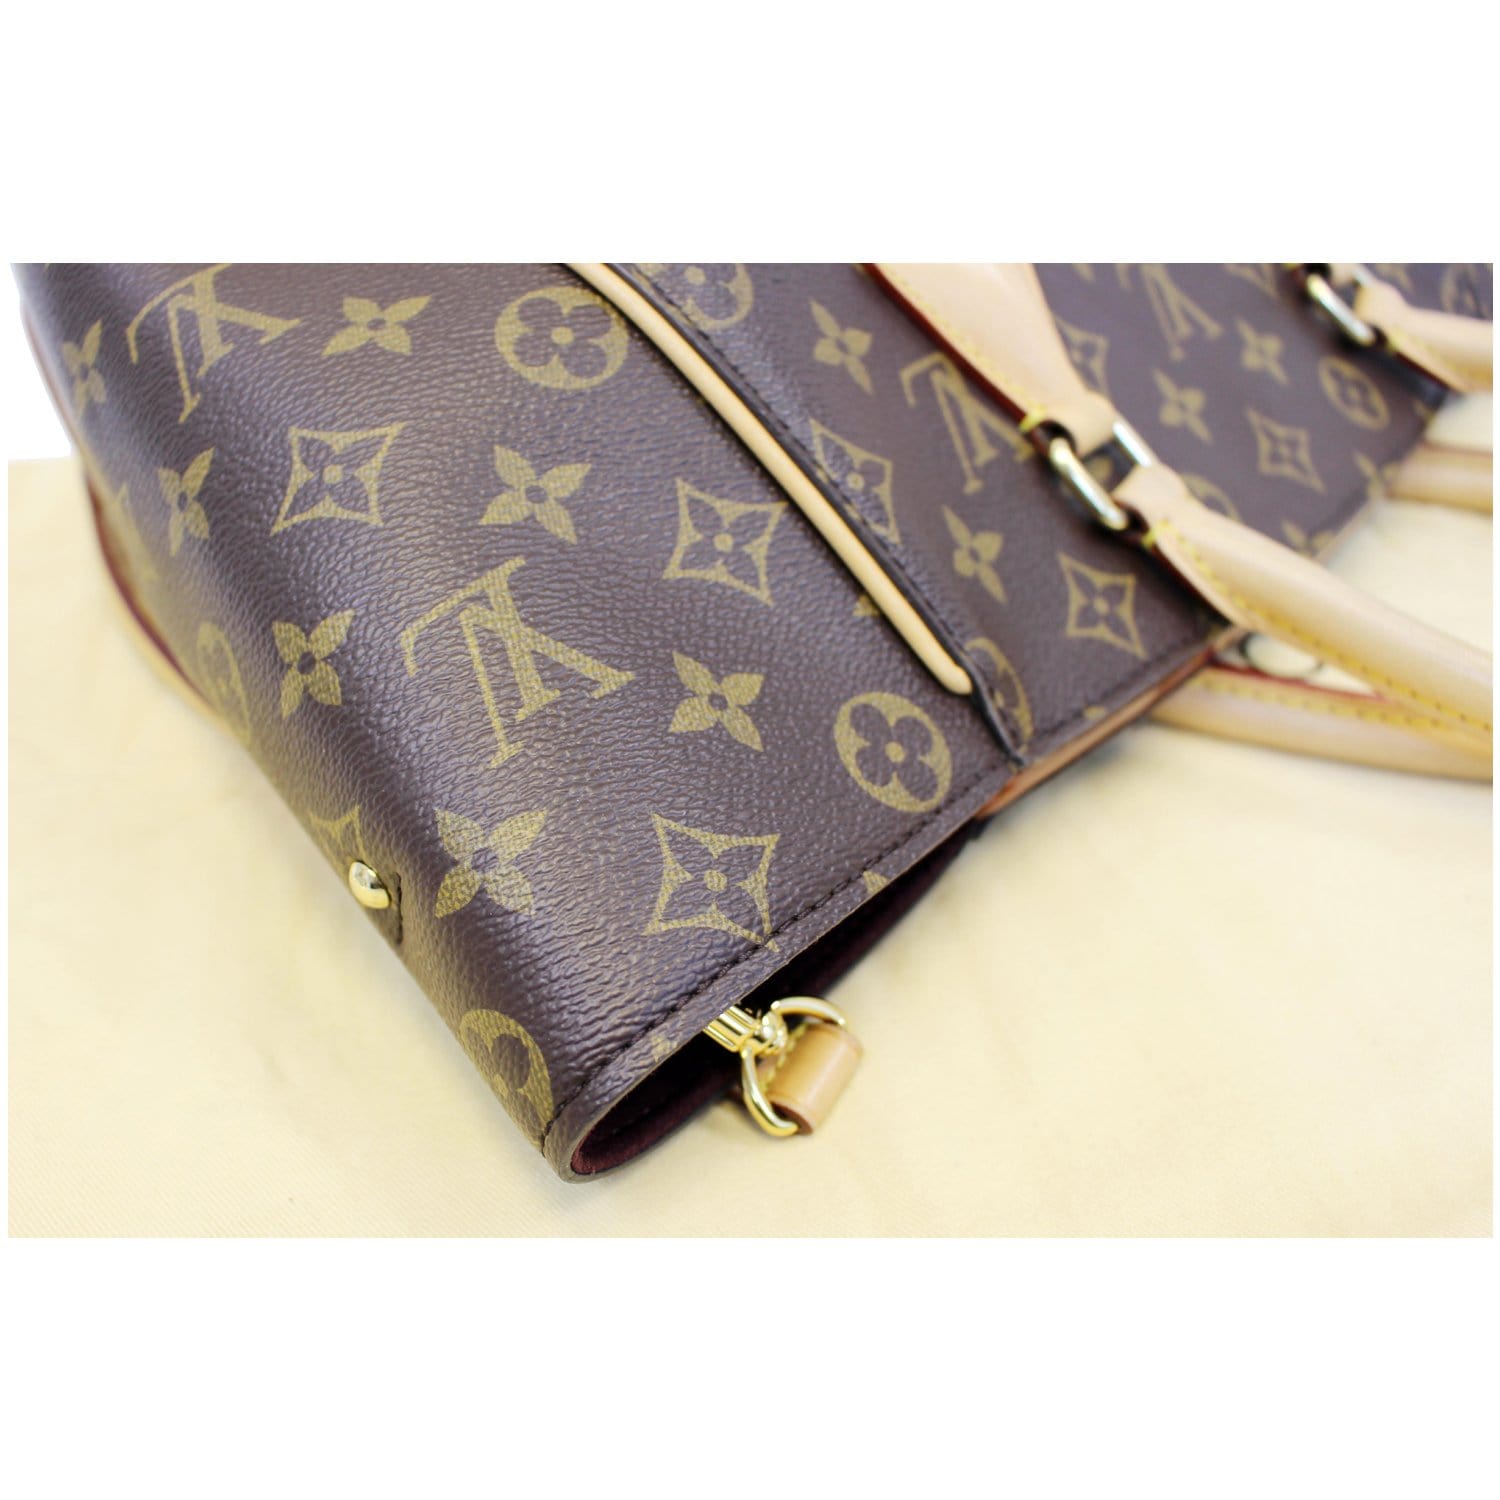 LOUIS VUITTON 'Phenix' bag in brown monogram coated canvas and